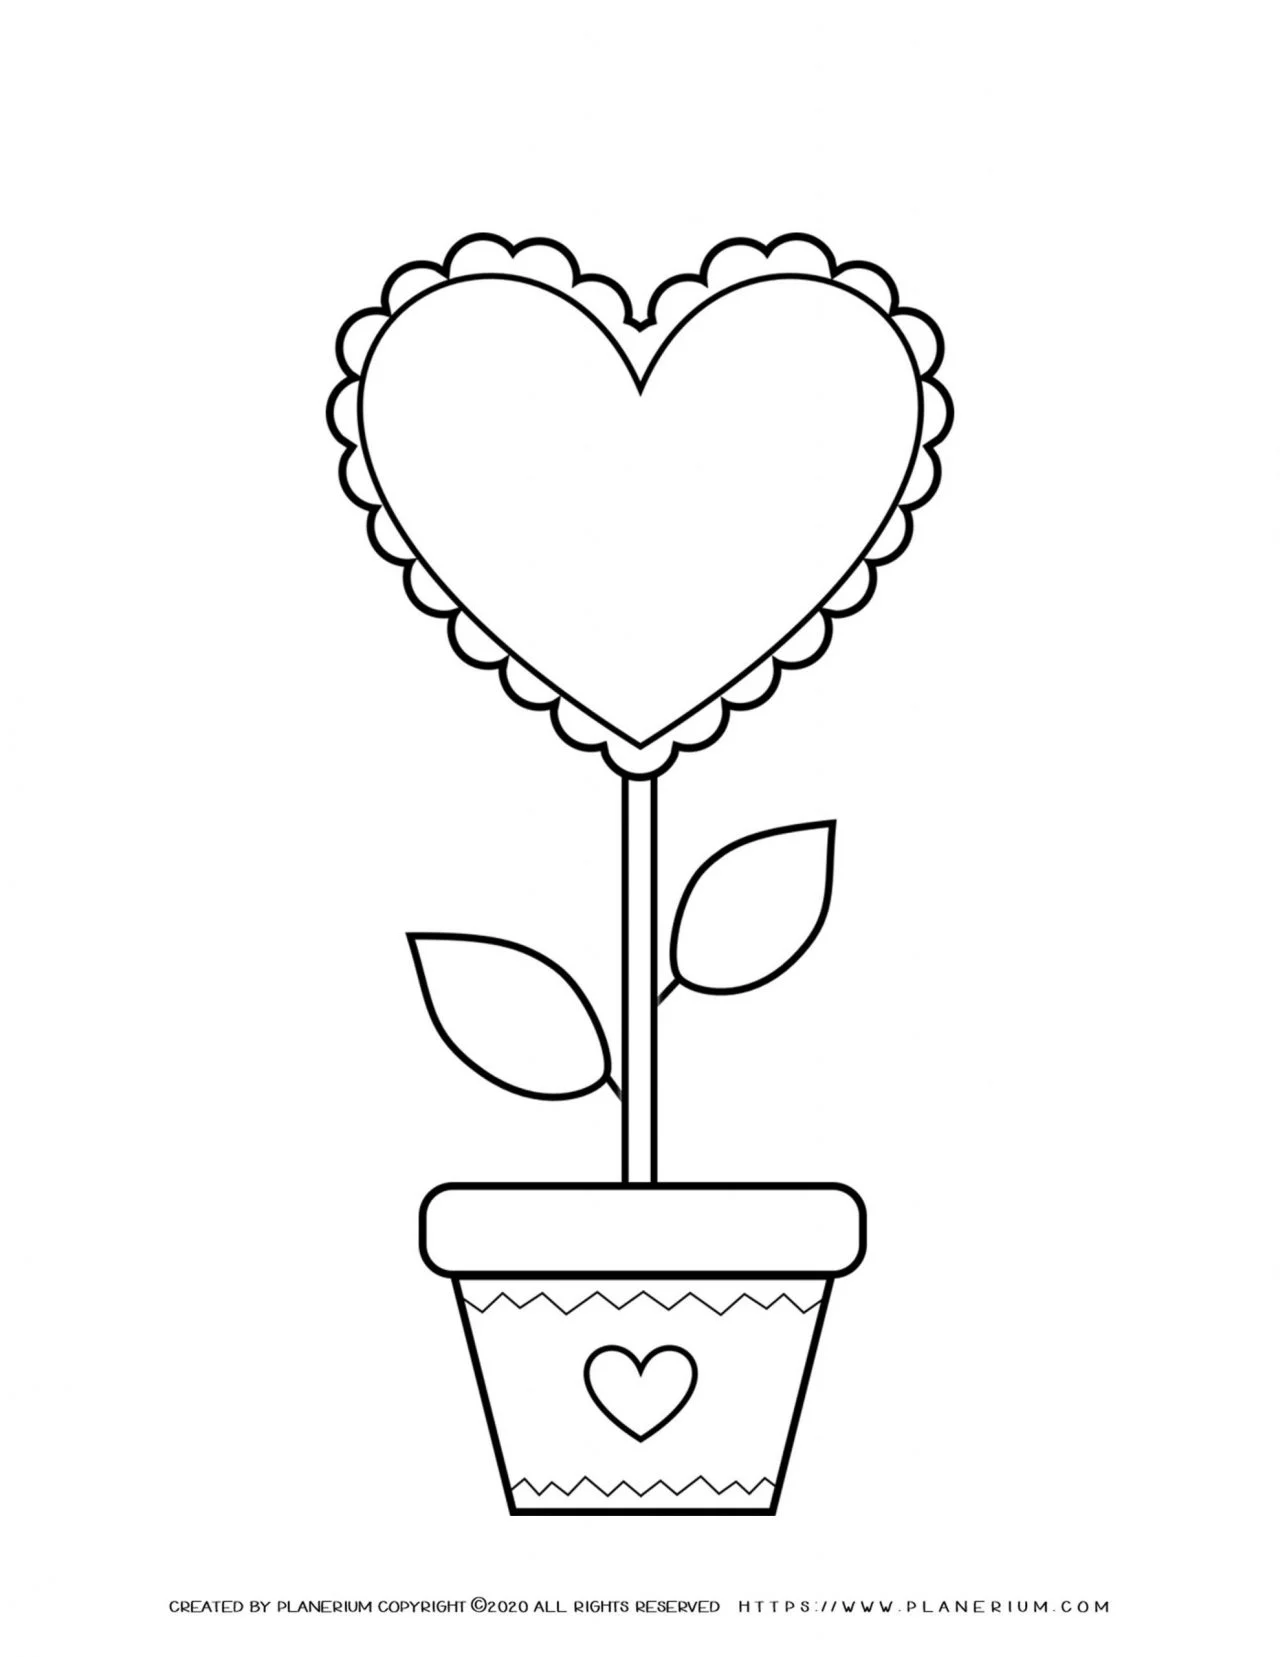 Heart Flower Coloring Page | Planerium